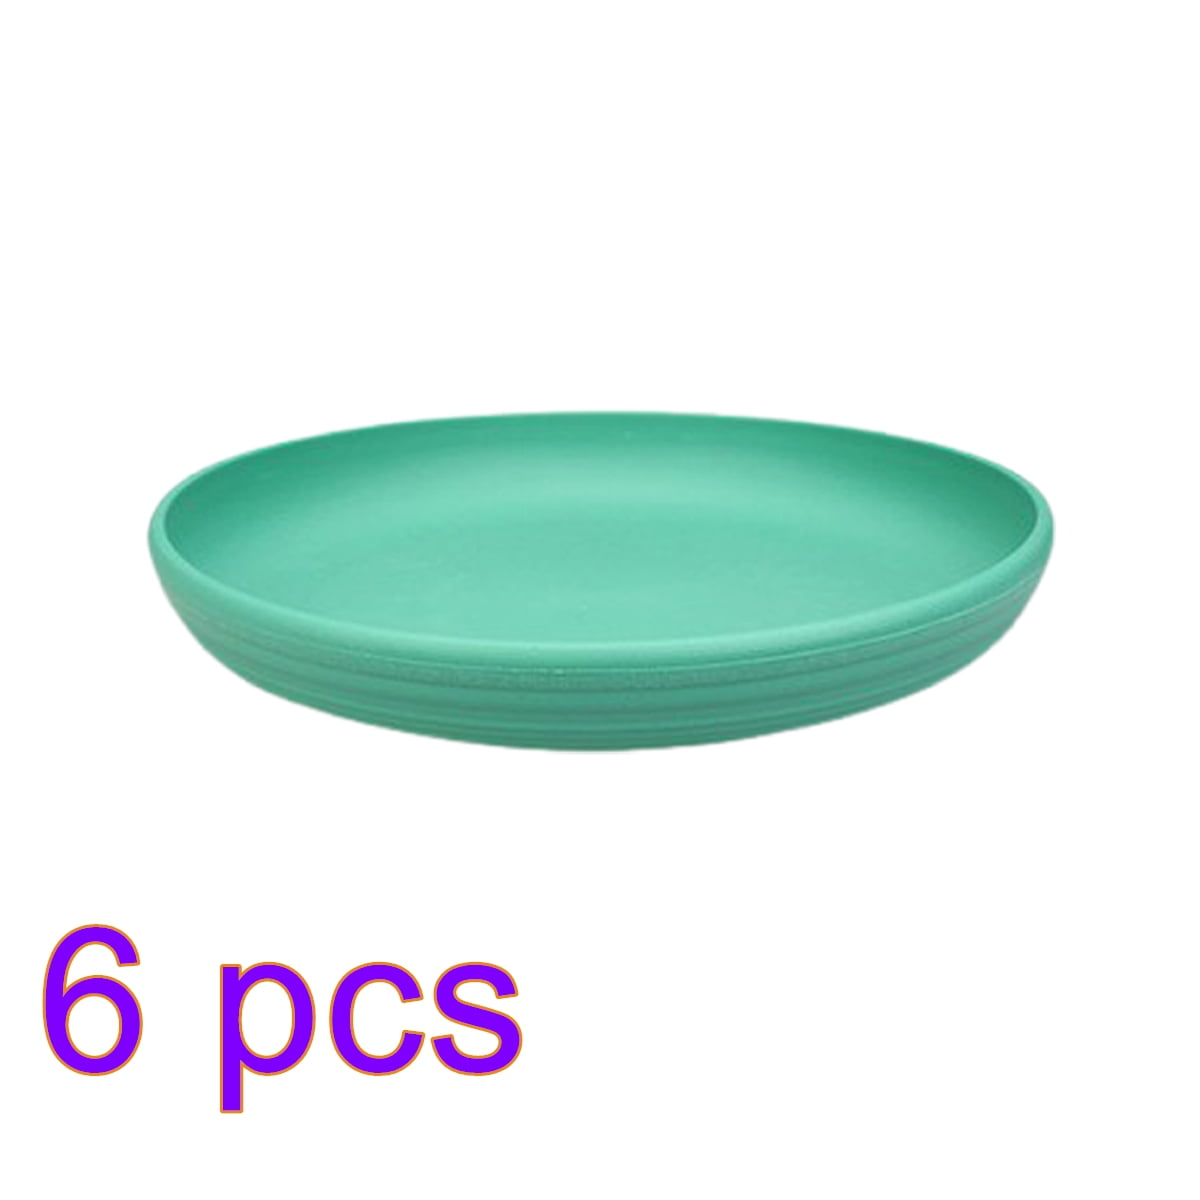 Round Plastic Plant Pot Saucers Flower Pot Tray for Indoor Outdoor Garden GROWNEER 6 Packs 12 Inches Plant Saucer Drip Trays Brown Suit for Pots Less Than 10 Inches Bottom Diameter 